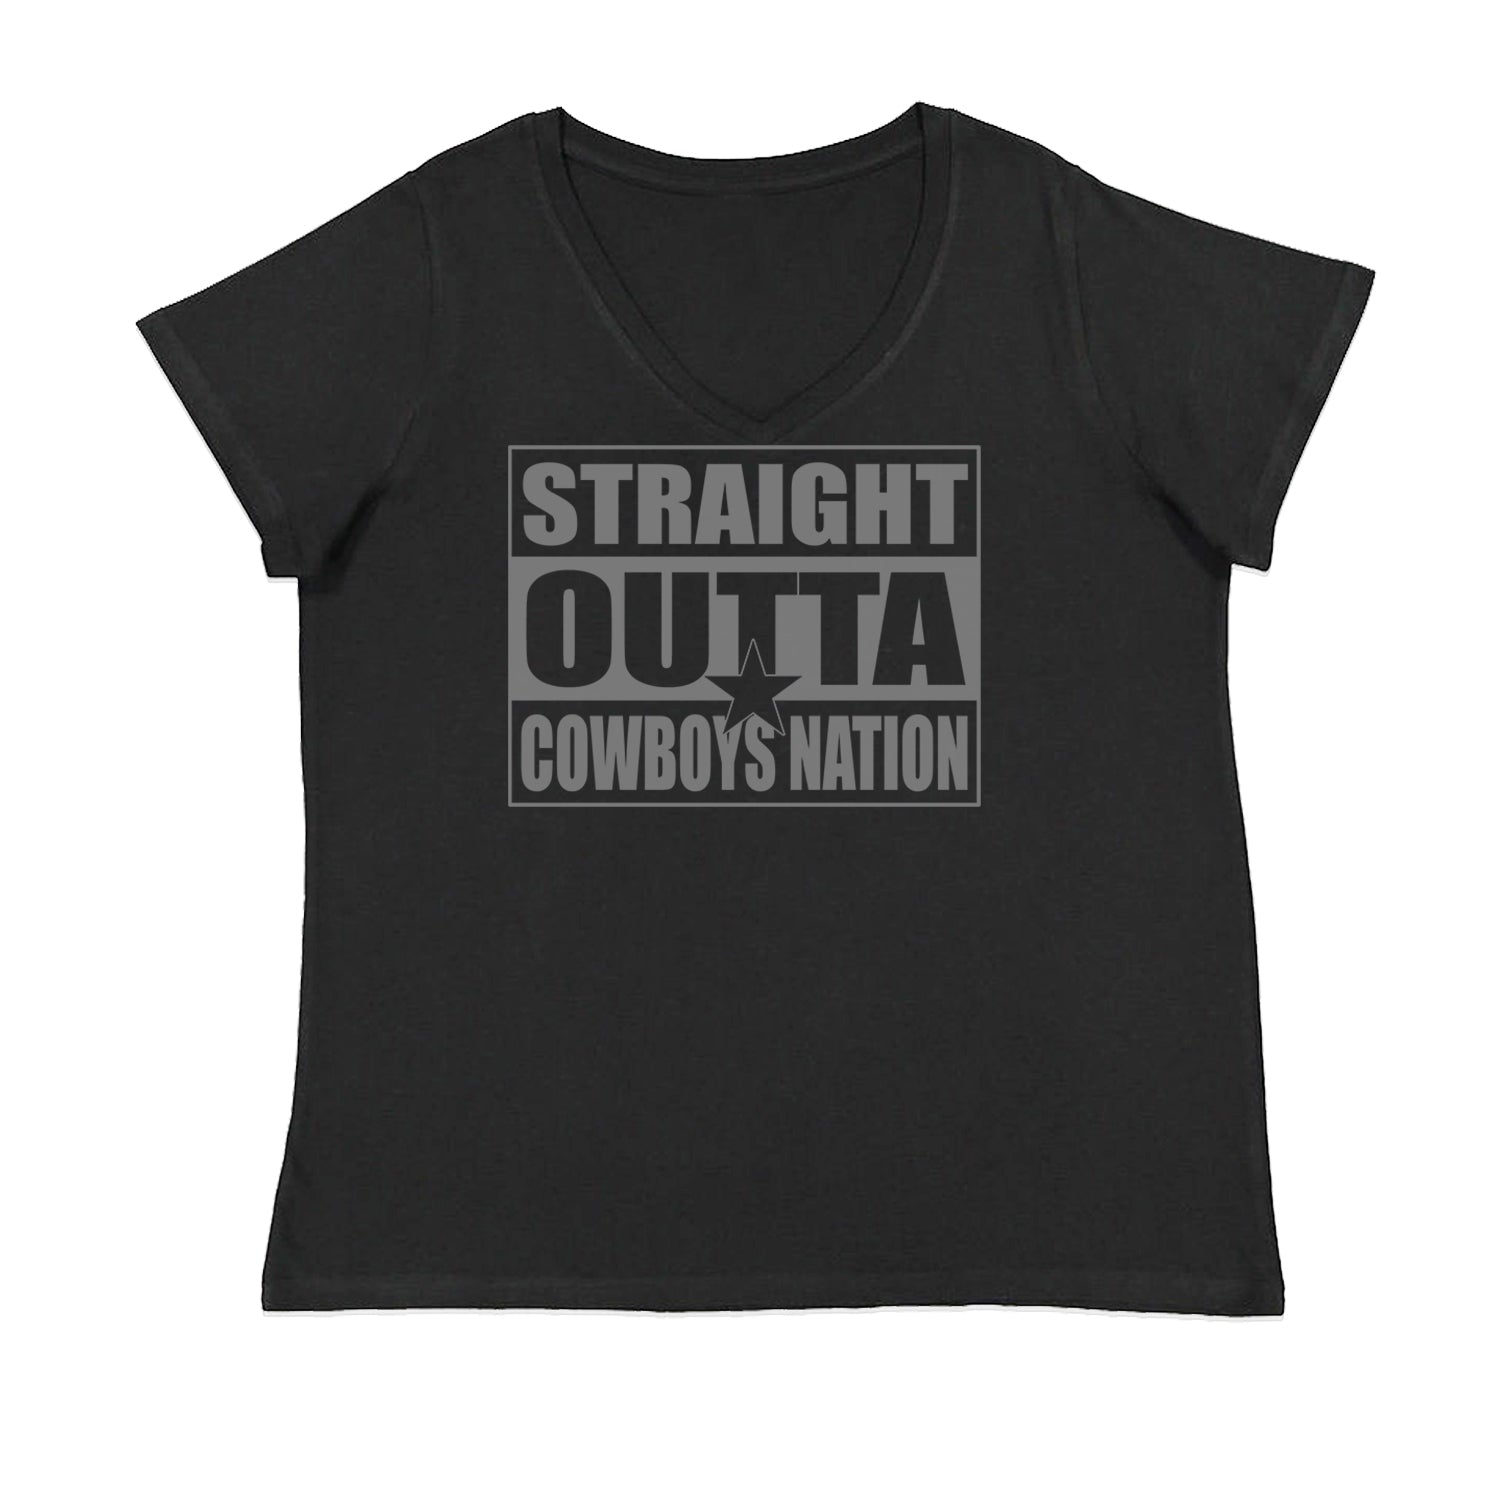 Straight Outta Cowboys Nation   Womens Plus Size V-Neck T-shirt